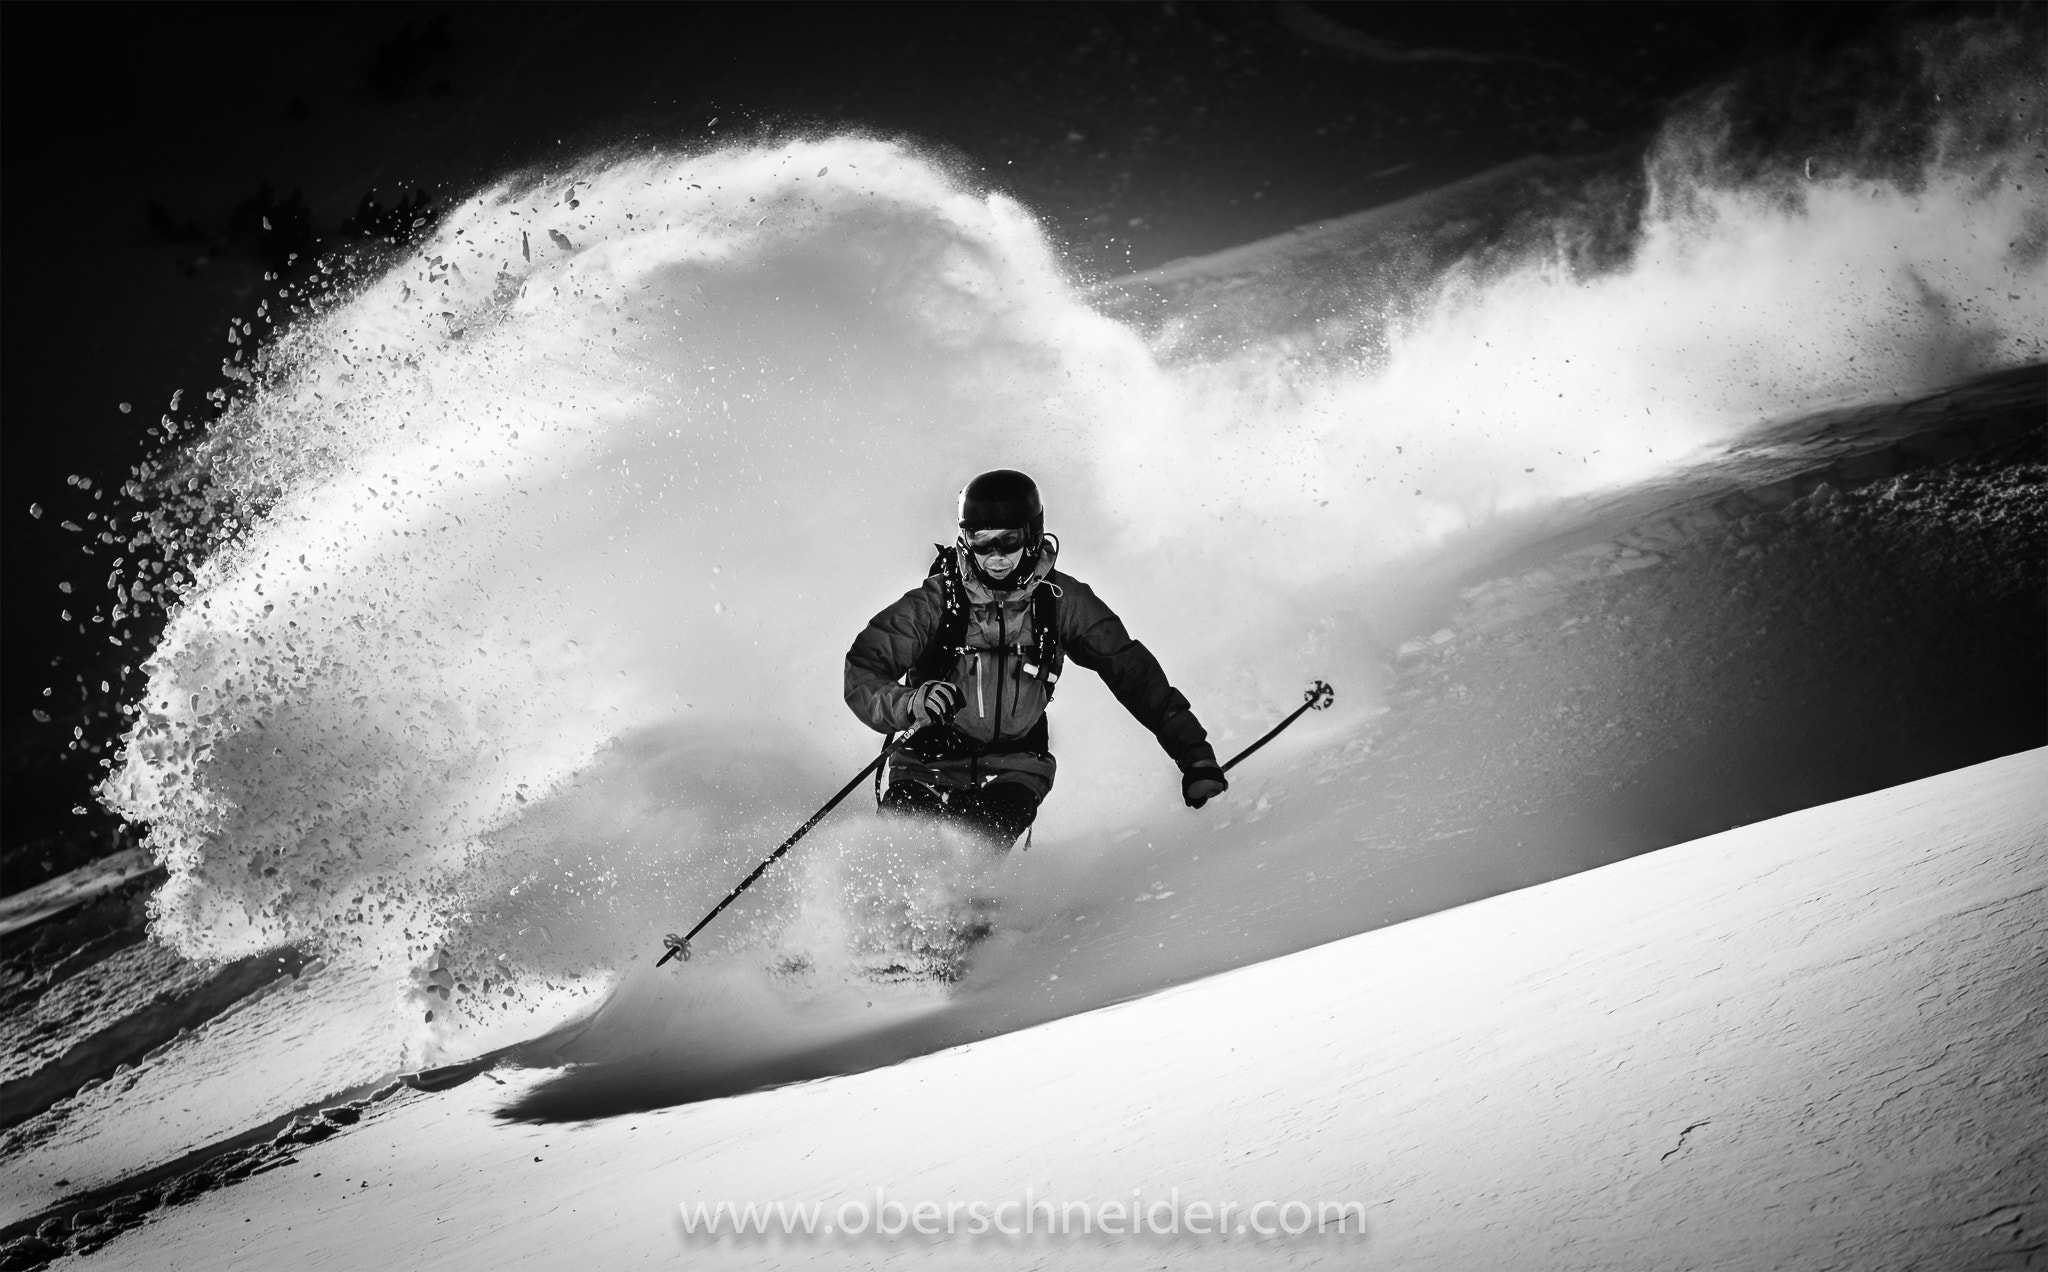 Sony a99 II + Tamron SP 70-200mm F2.8 Di VC USD sample photo. Black and white powder skiing photography